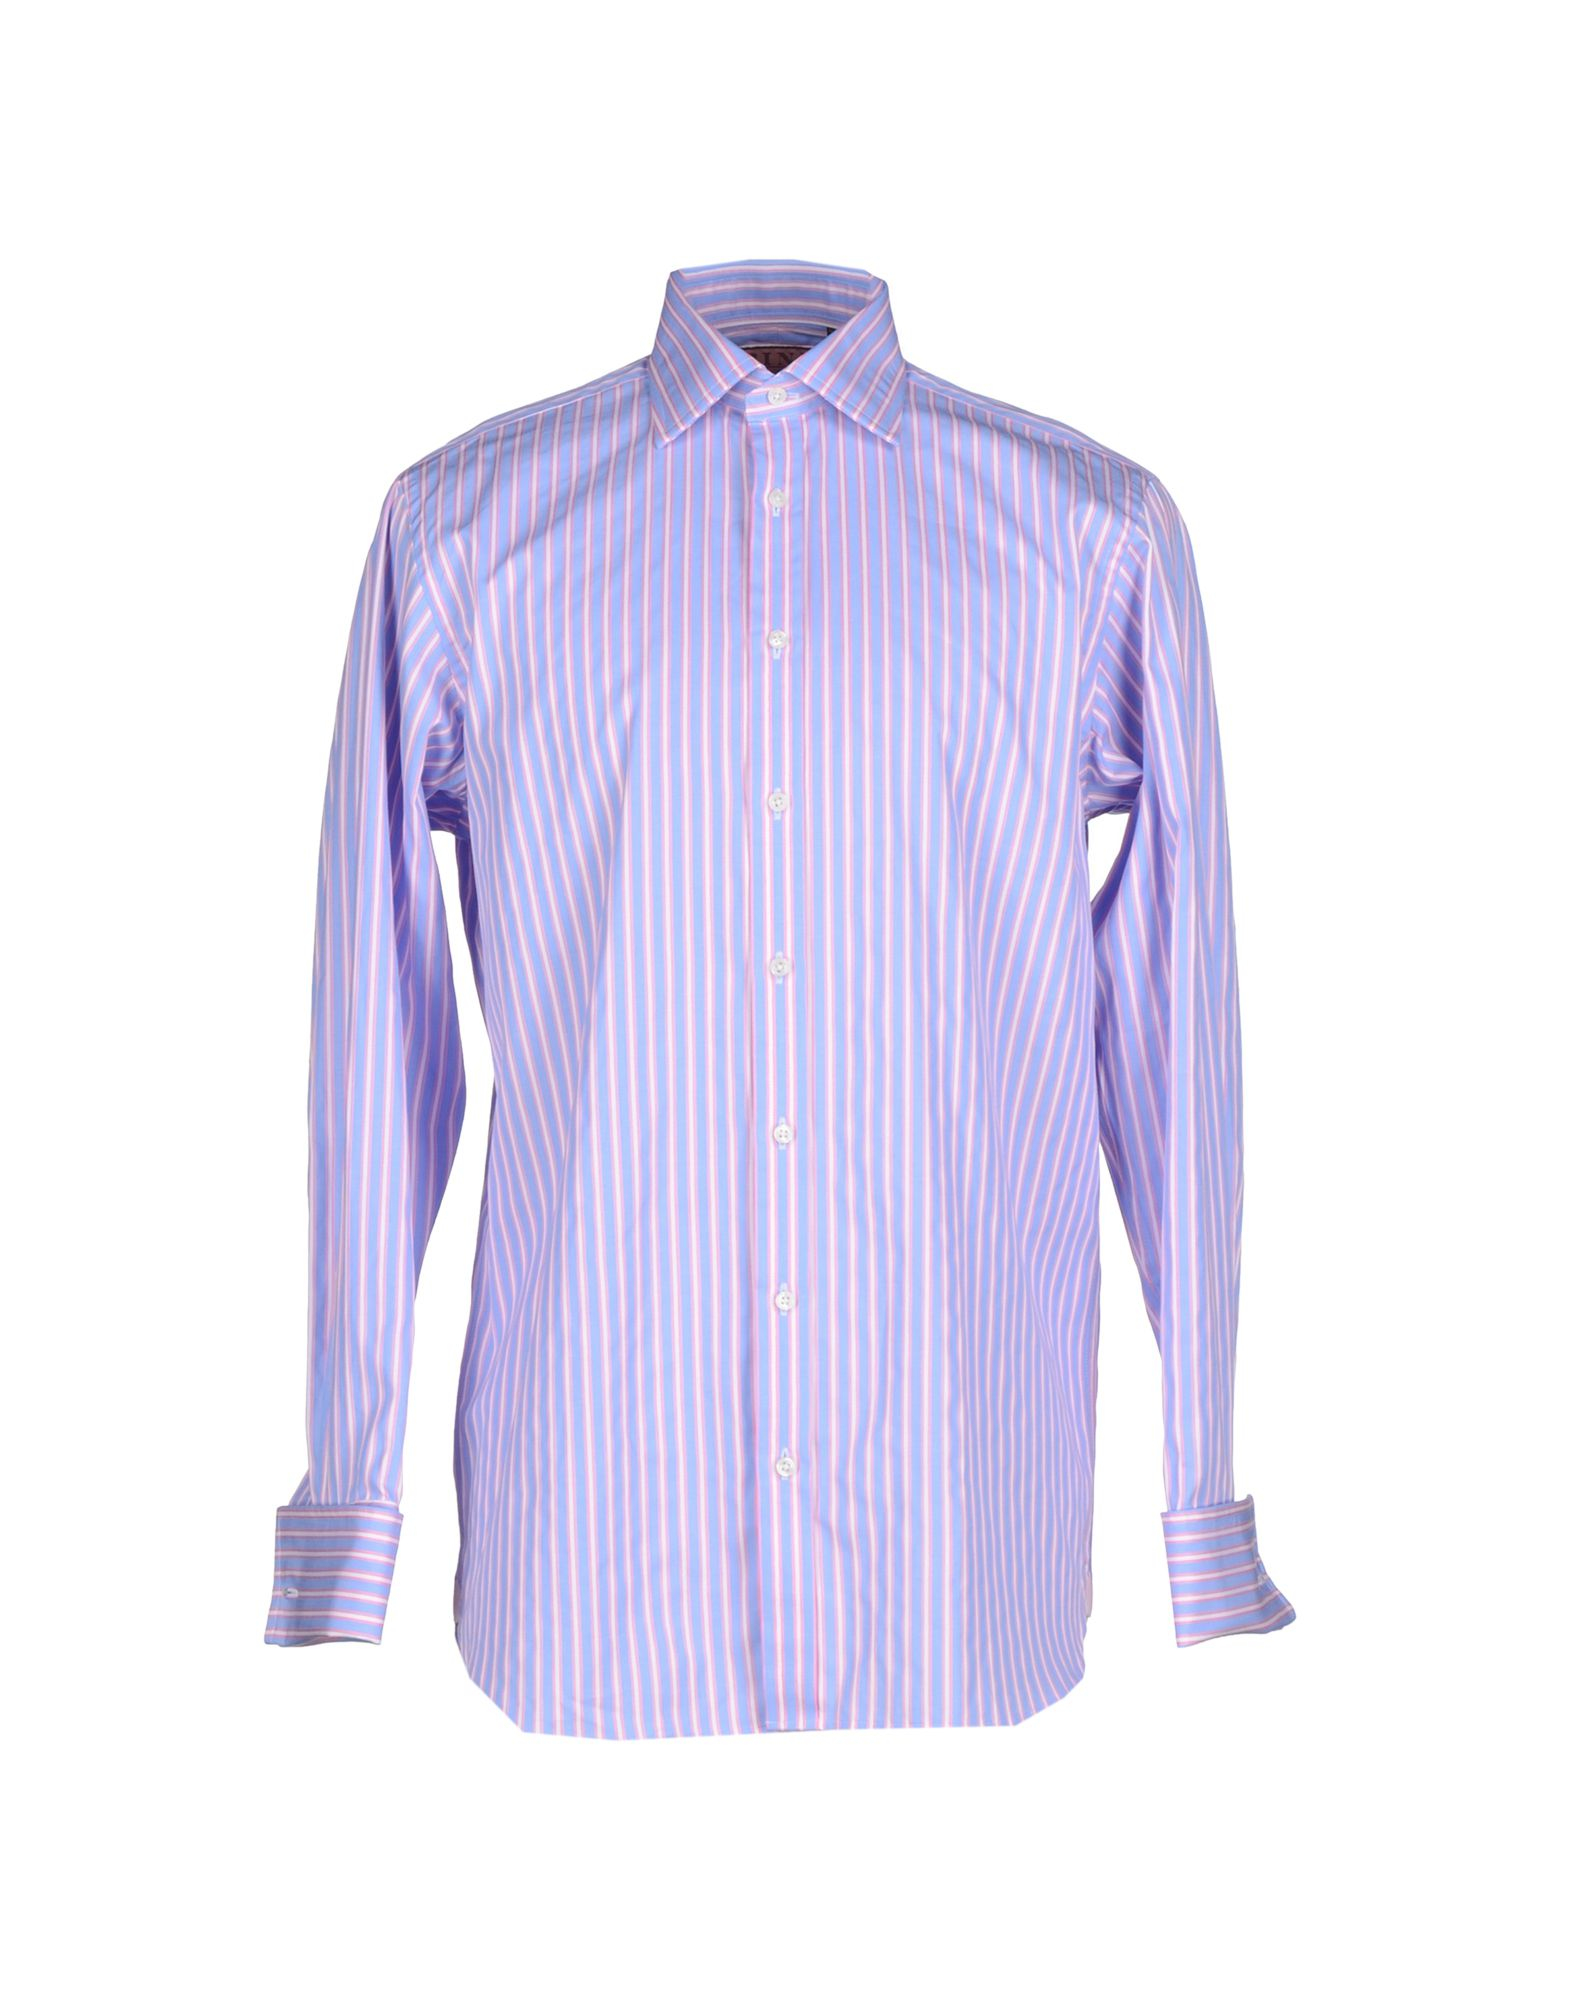 Lyst - Thomas Pink Shirt in Purple for Men